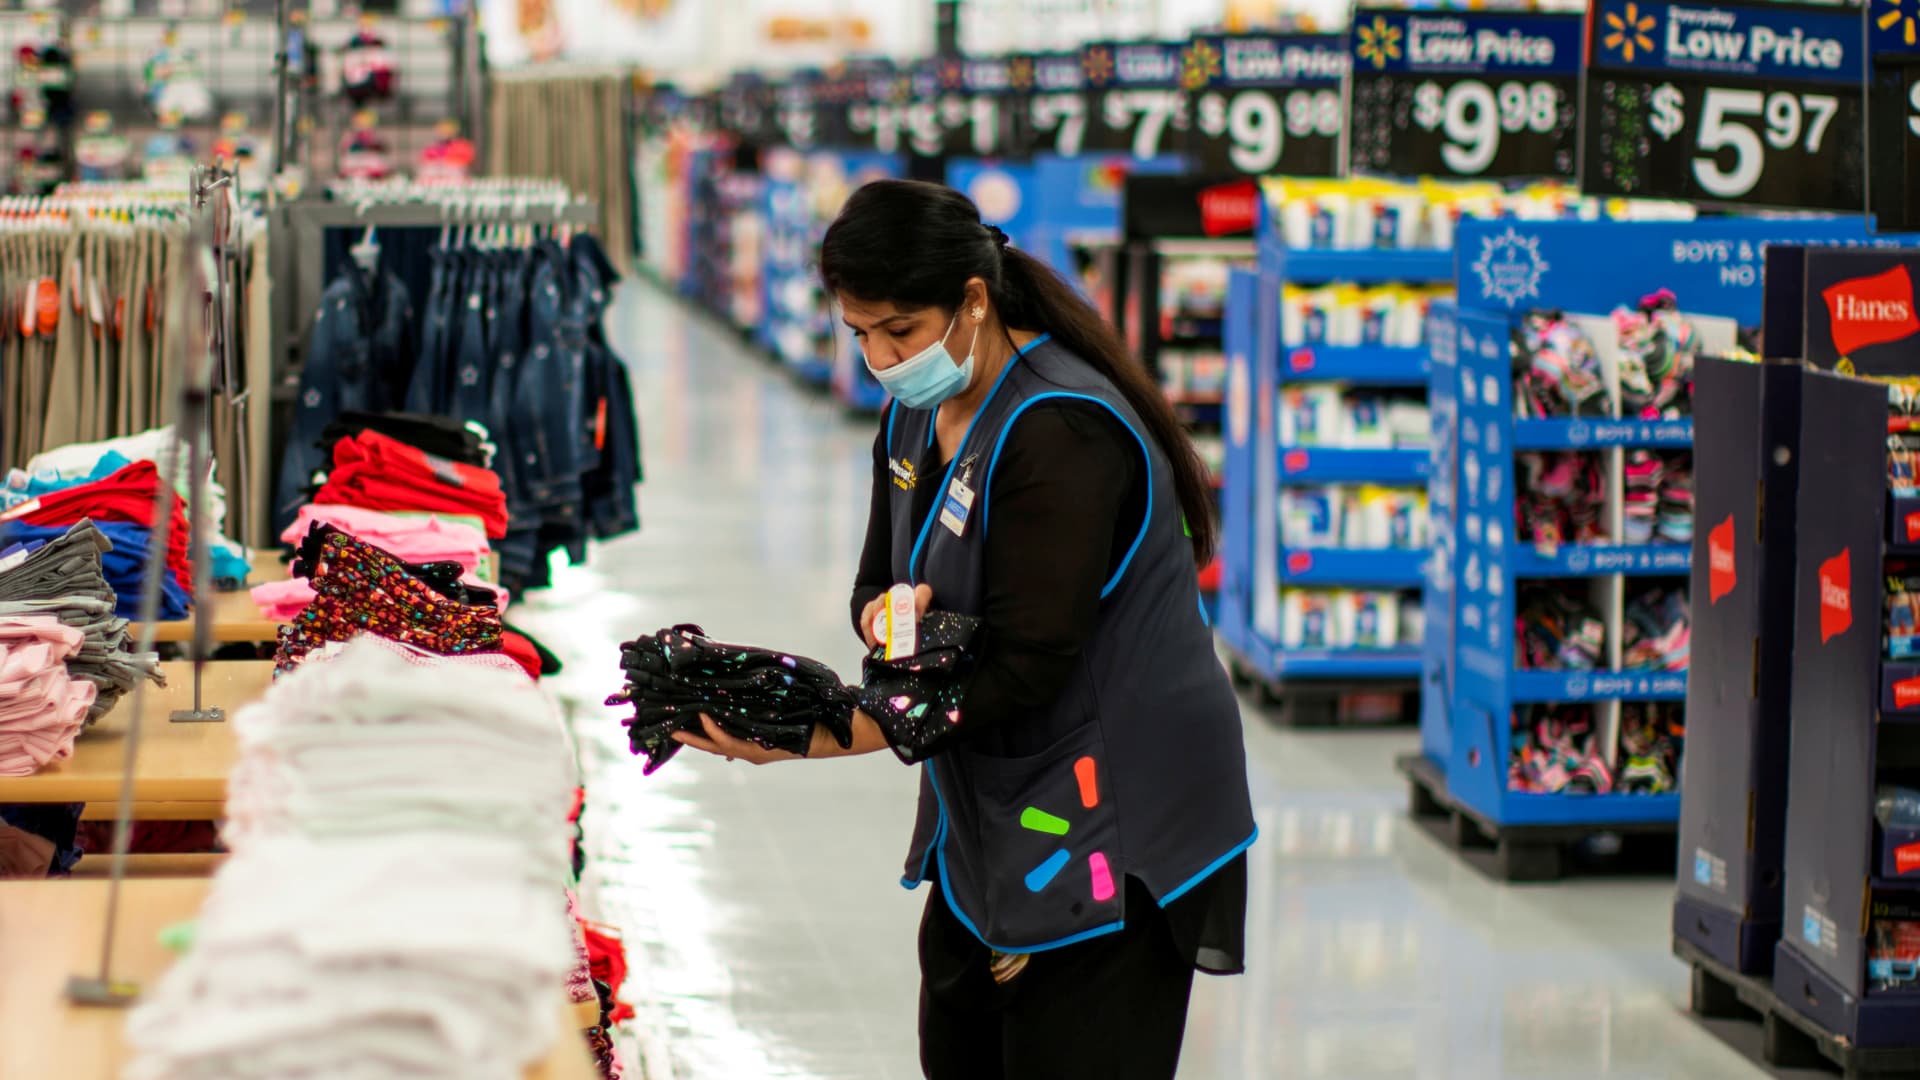 A worker is seen wearing a mask while organizing merchandise at a Walmart store, in North Brunswick, New Jersey, July 20, 2020.